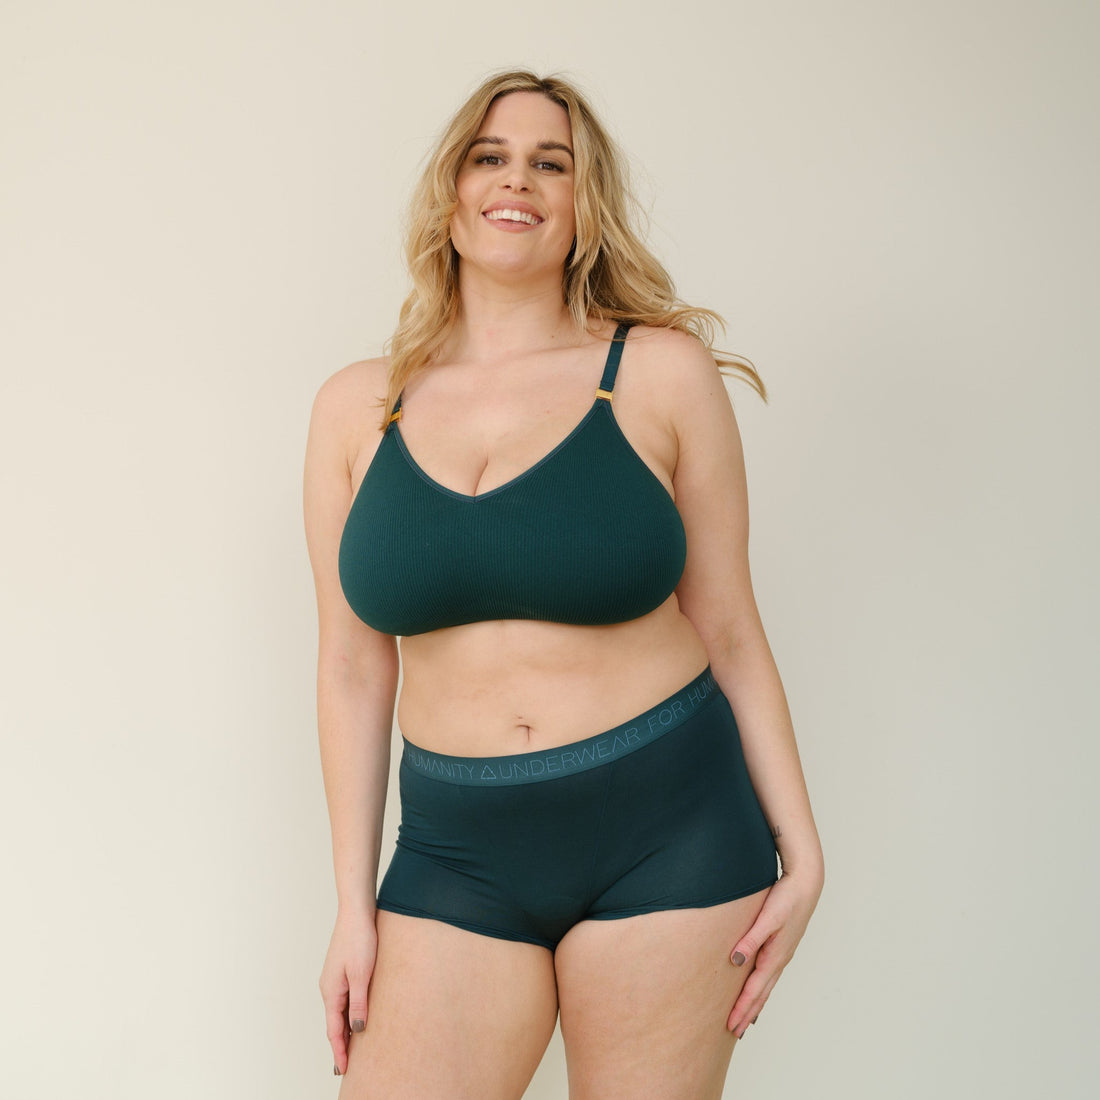 Sustainable Atlantis wireless bra by Underwear For Humanity, DD-GG cup sizes. Recycled materials, flexible, natural shape and supportive. Knitted bra and band, adjustable straps. Model wears the DD+ bra.